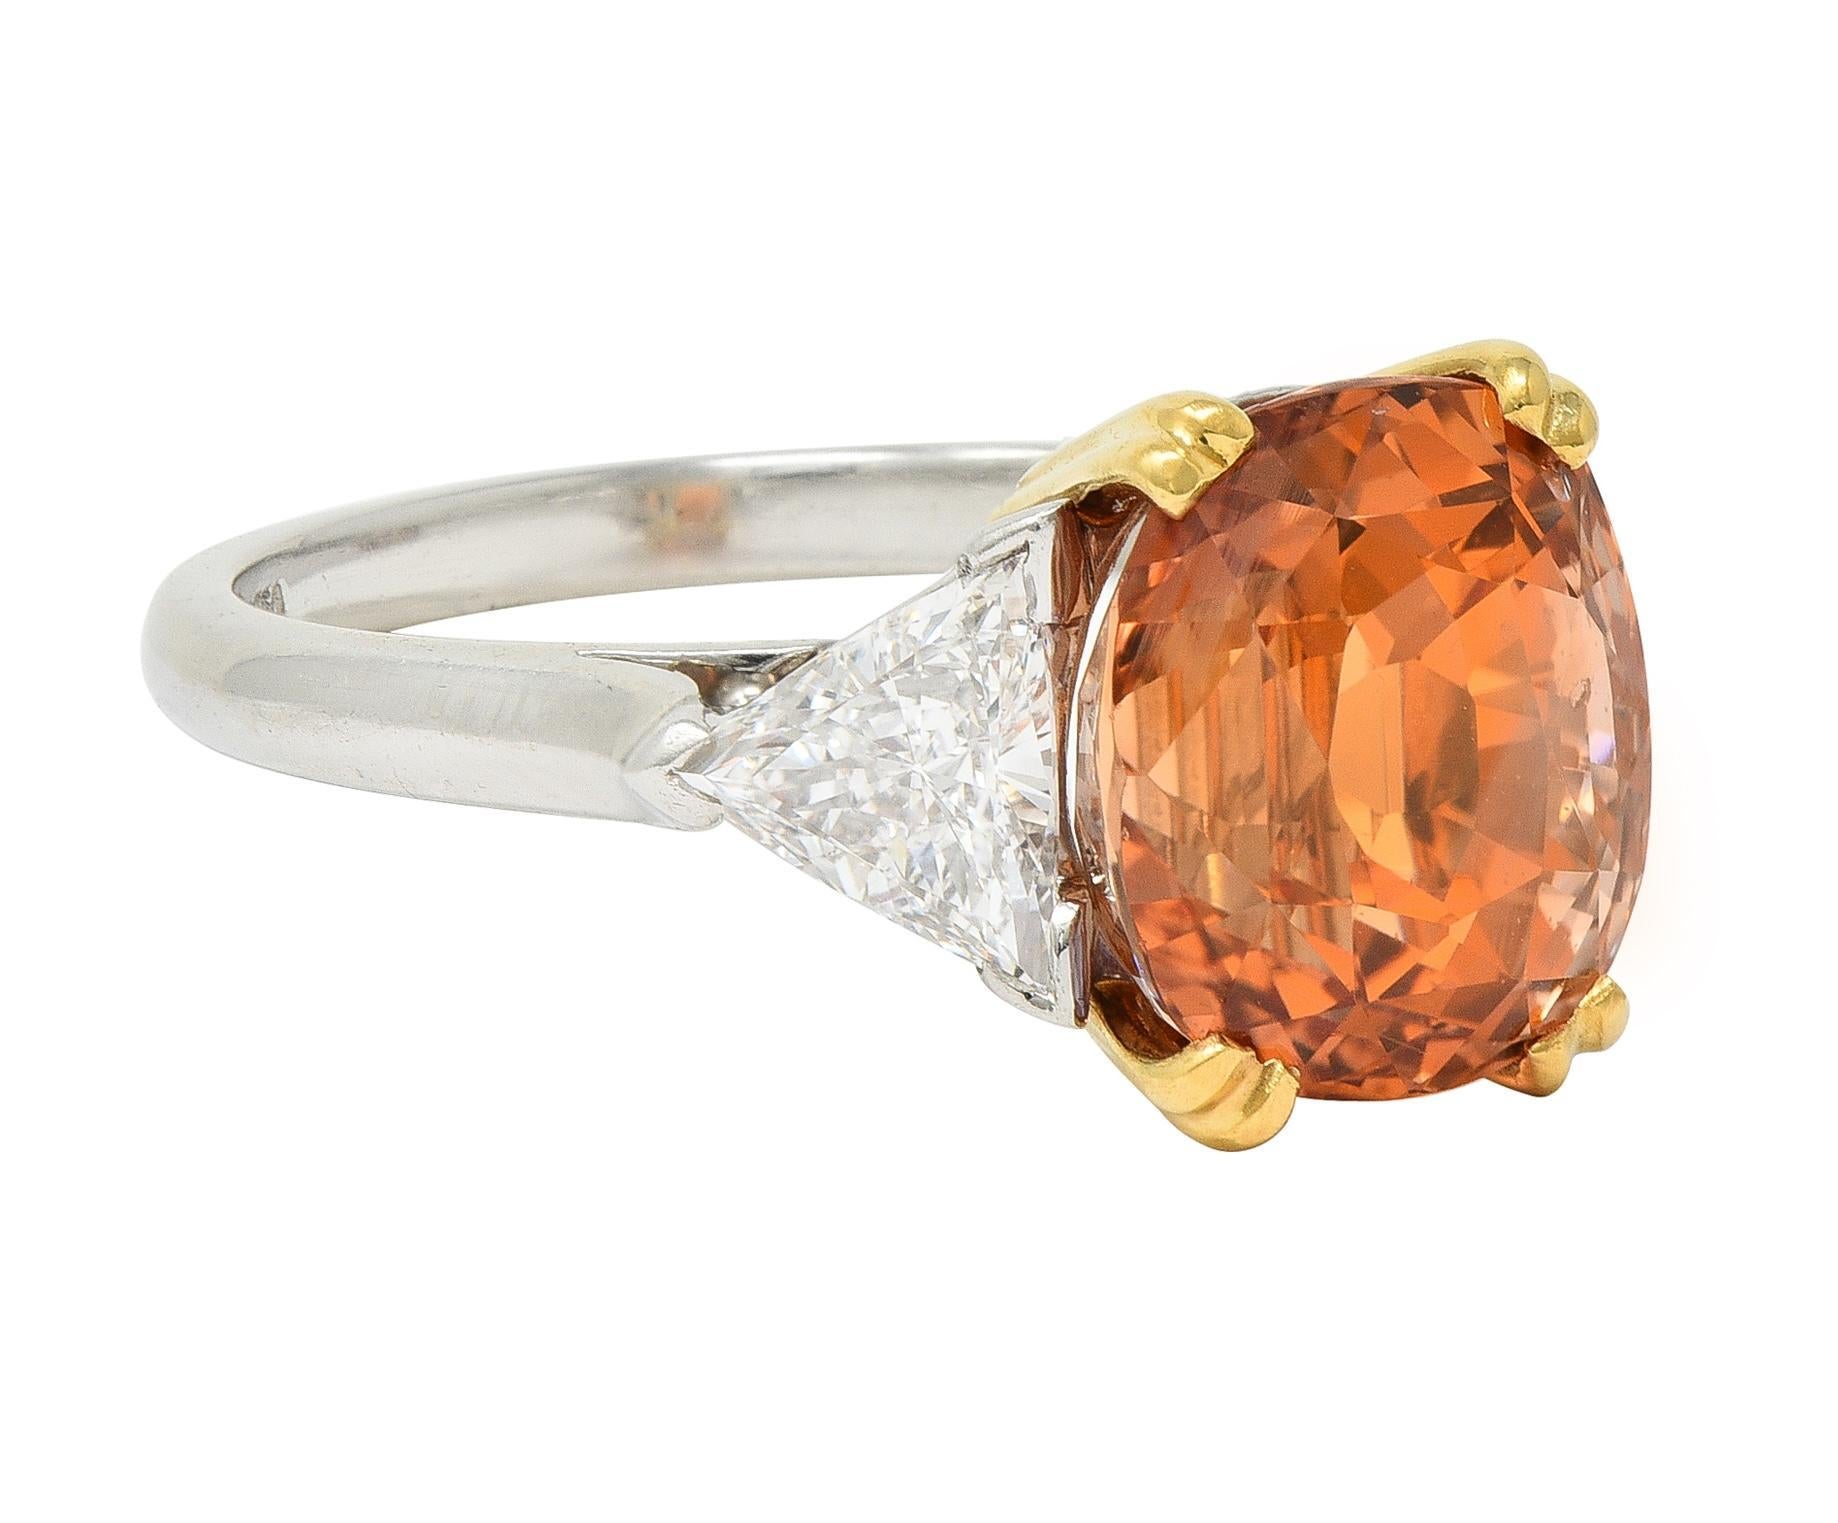 Centering a cushion cut sapphire weighing approximately 7.66 carats - transparent light pinkish-orange 
Set with split gold prongs in basket mount and flanked by cathedral shoulders
Bar set with trilliant cut diamonds weighing approximately 0.95